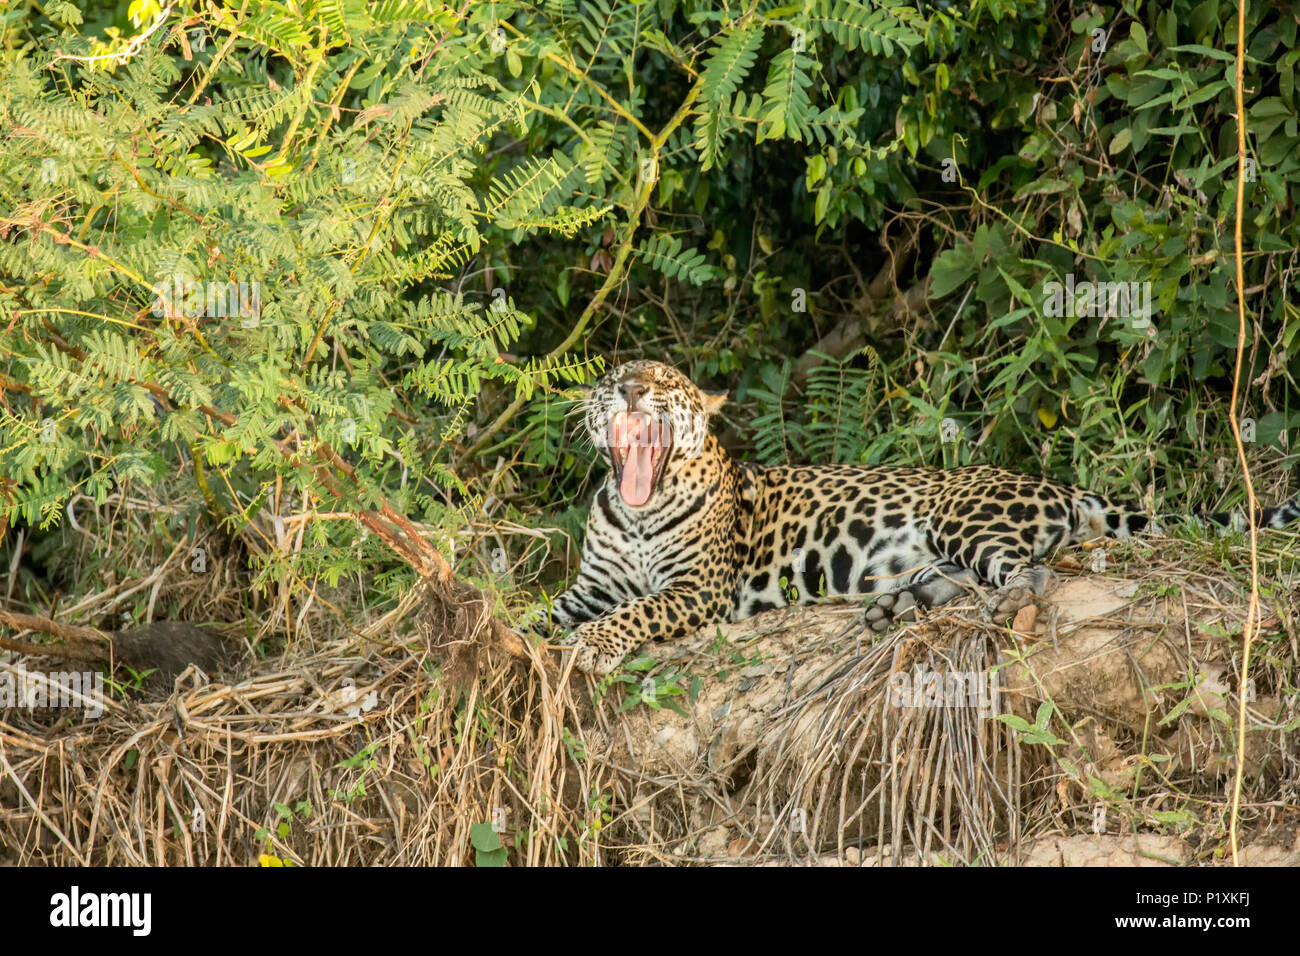 Pantanal region, Mato Grosso, Brazil, South America.  Jaguar yawning in the mid-day heat. Stock Photo